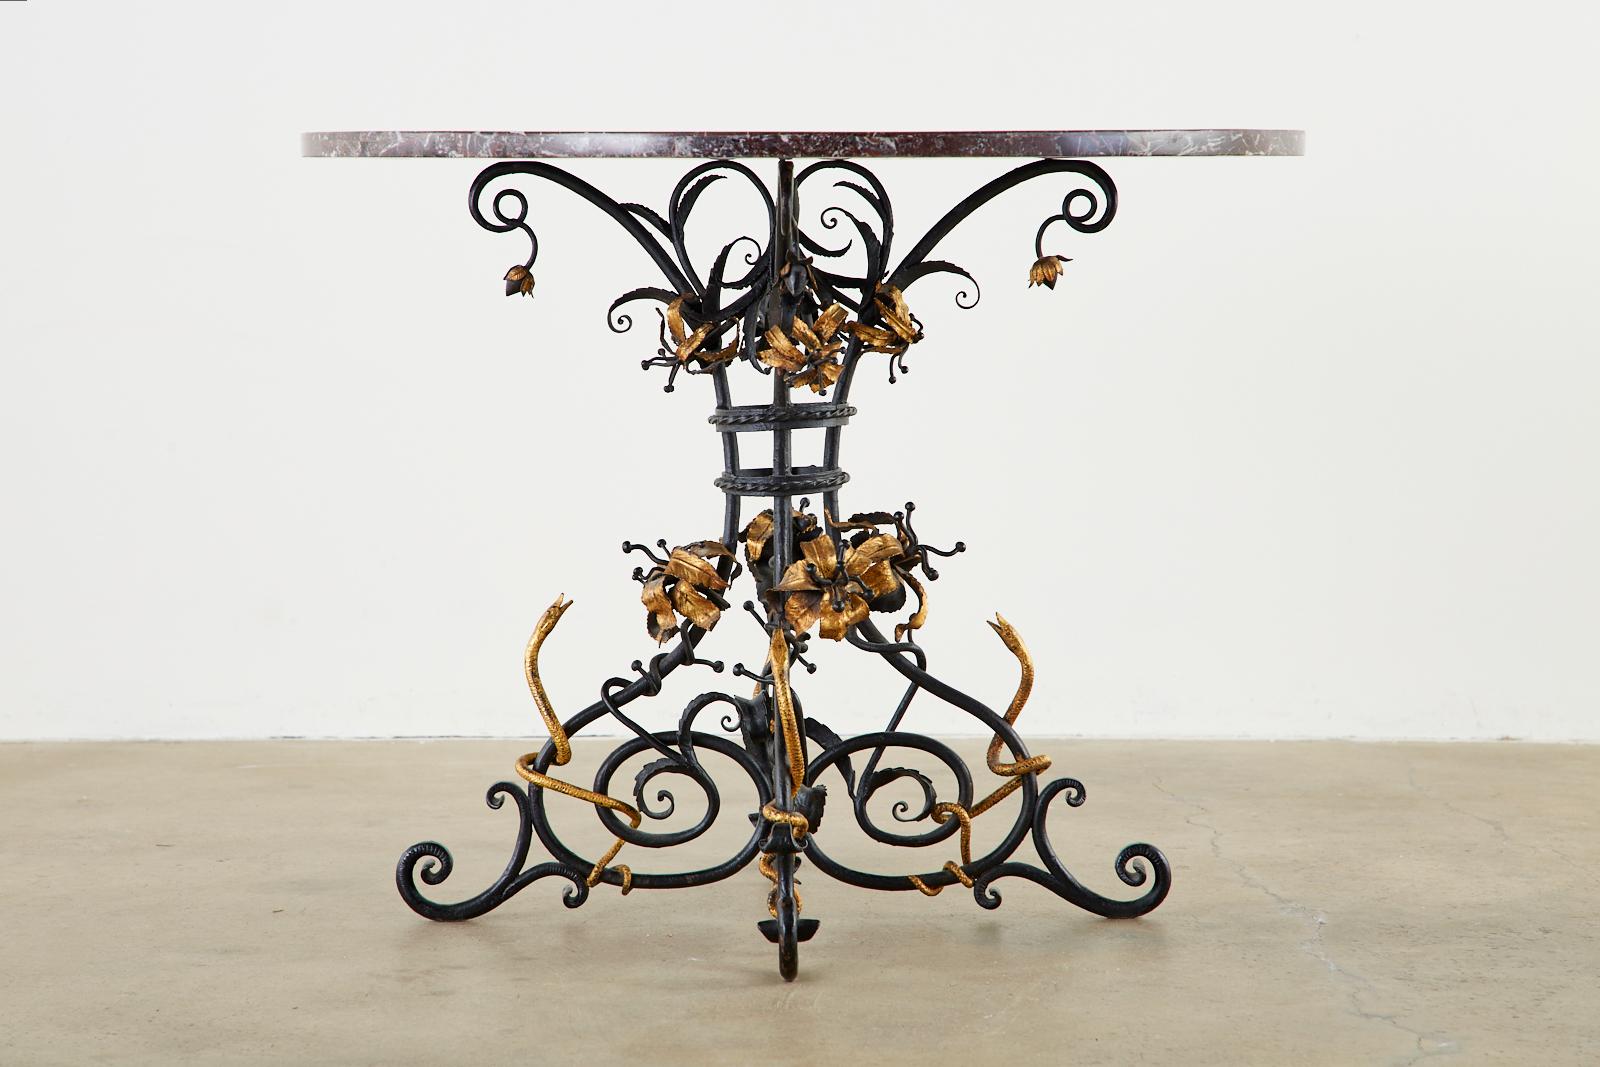 Dramatic Italian centre table featuring a Pietra Dura mosaic marble specimen round top. The 1 inch thick marble is inlaid with intricate neoclassical sunburst patterns centered with four snakes in an orb. Supported by an iron base with scroll legs